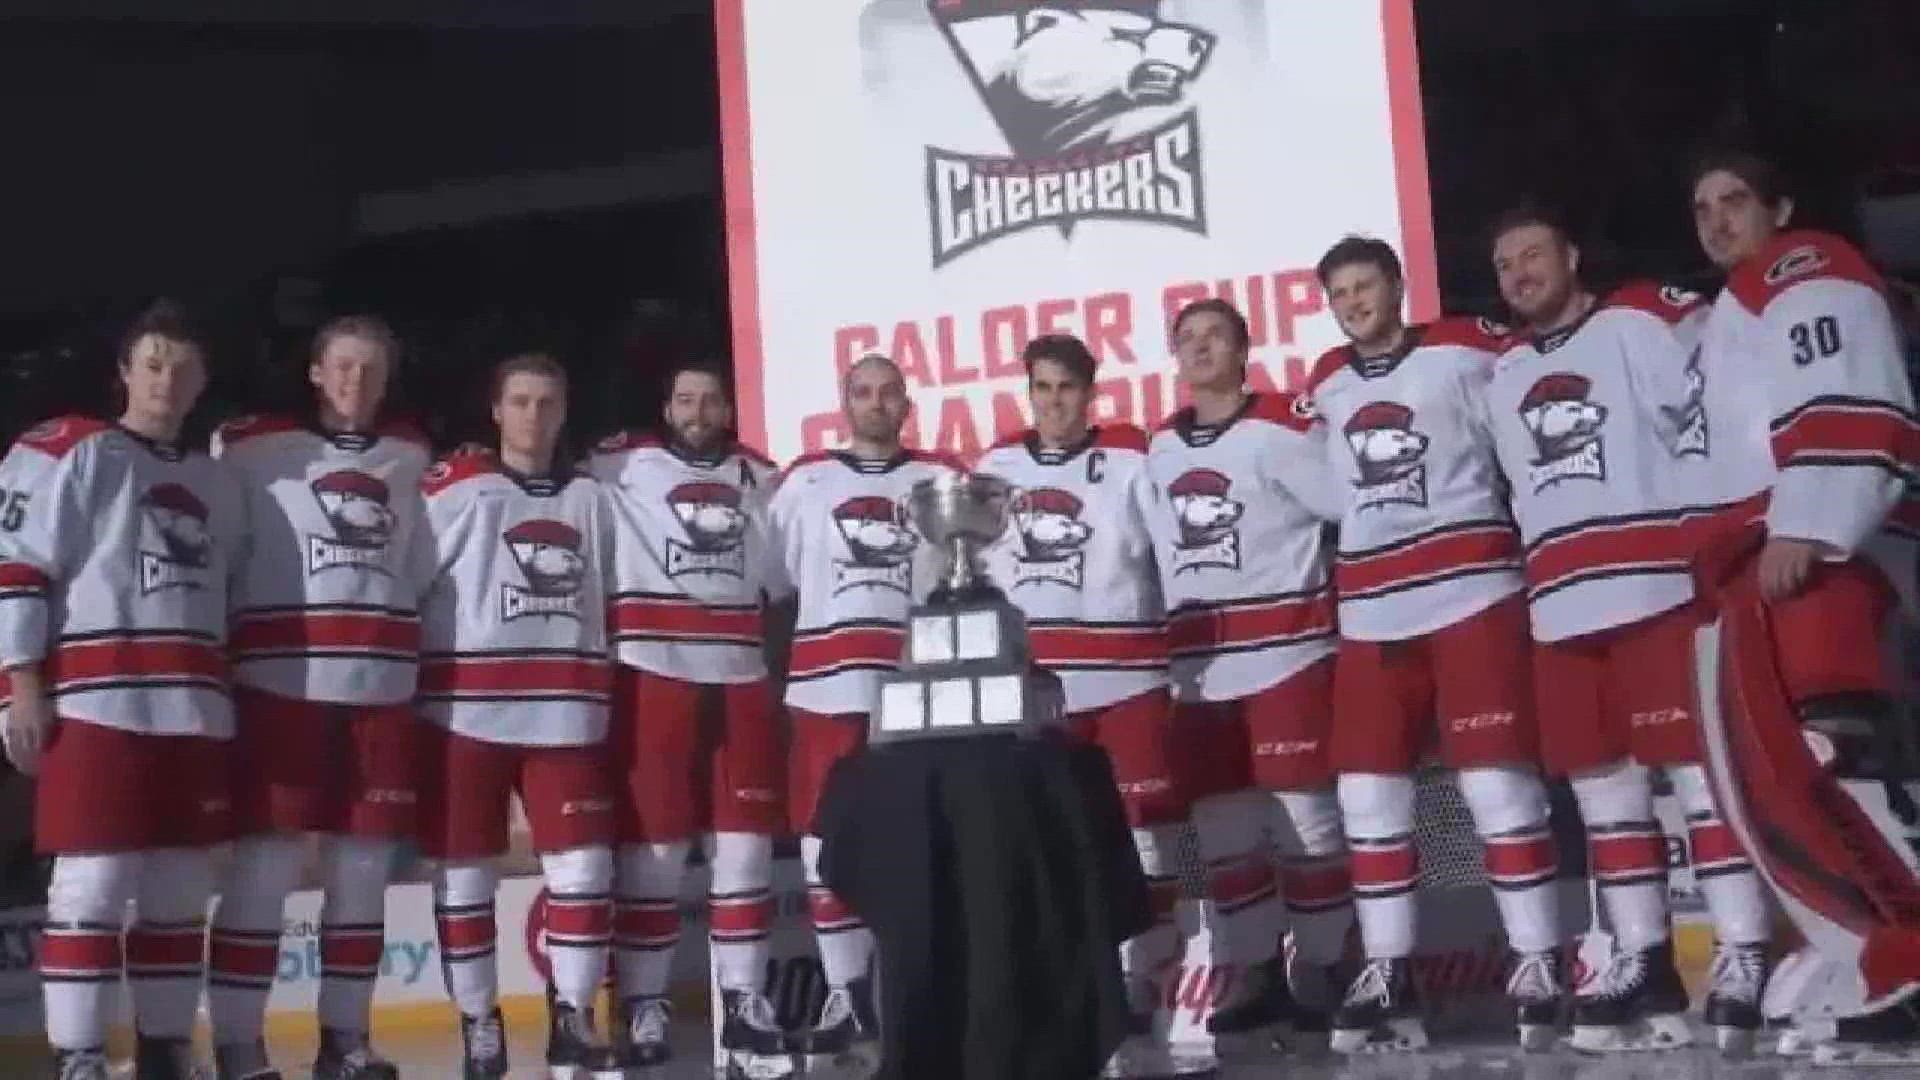 It's playoff season, and Nick Carboni shares how the Checkers are getting ready.